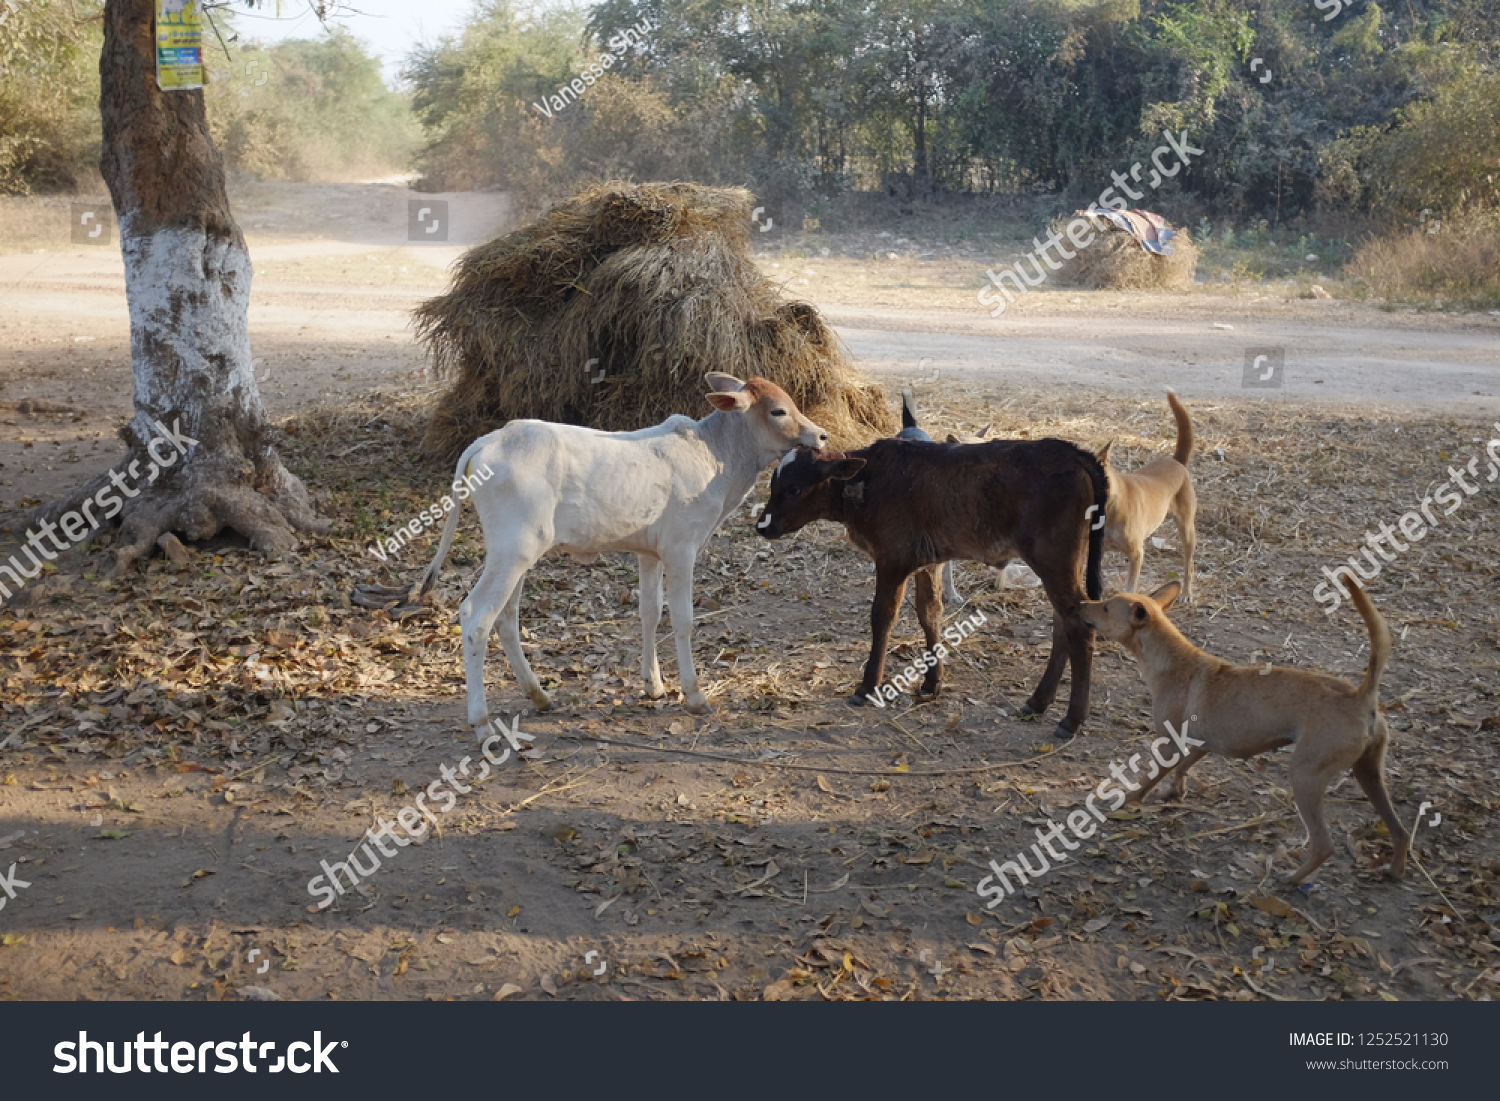 Livestock and dogs #1252521130